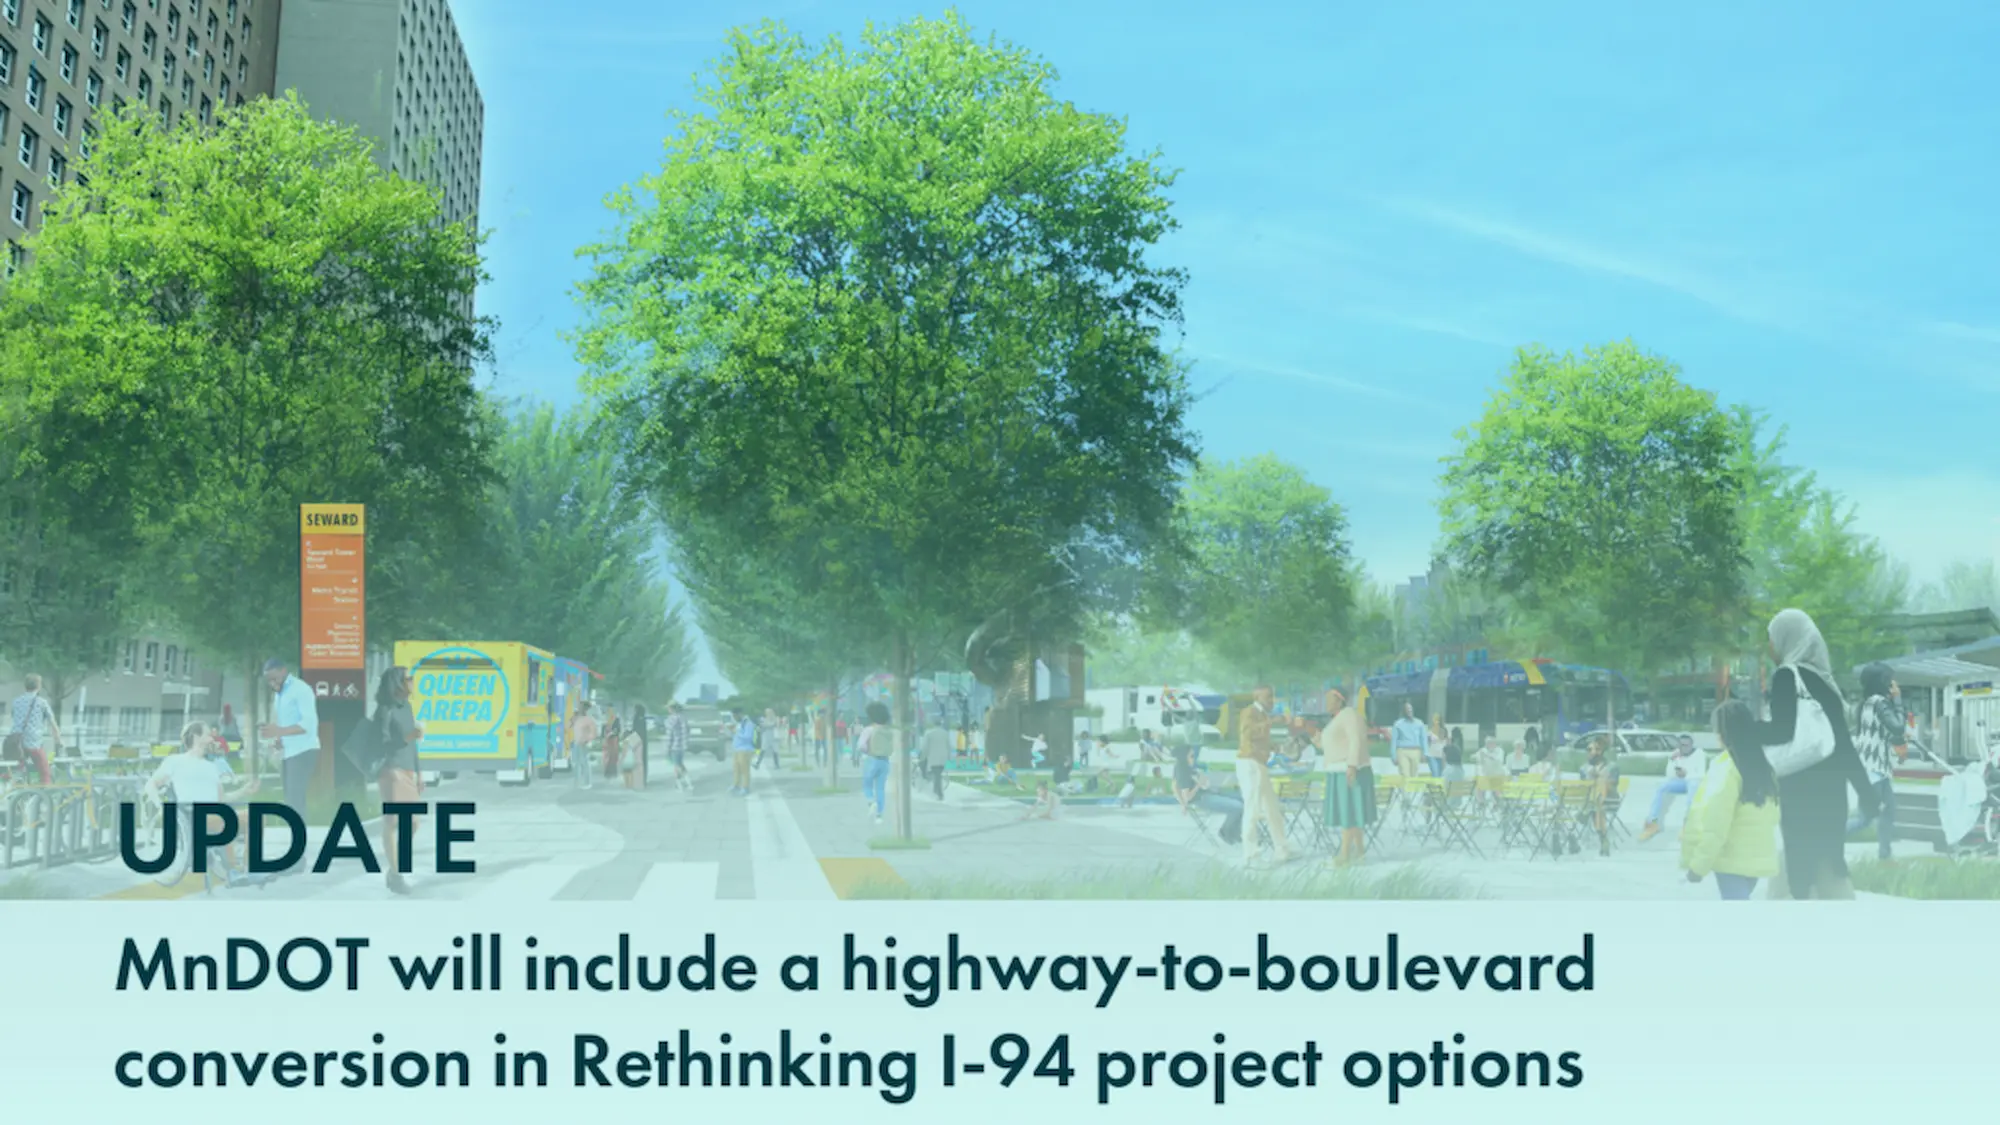 image of reimagined city space with text that reads "UPDATE: MnDOT will include a highway-to-boulevard conversion in Rethinking I-94 project options"